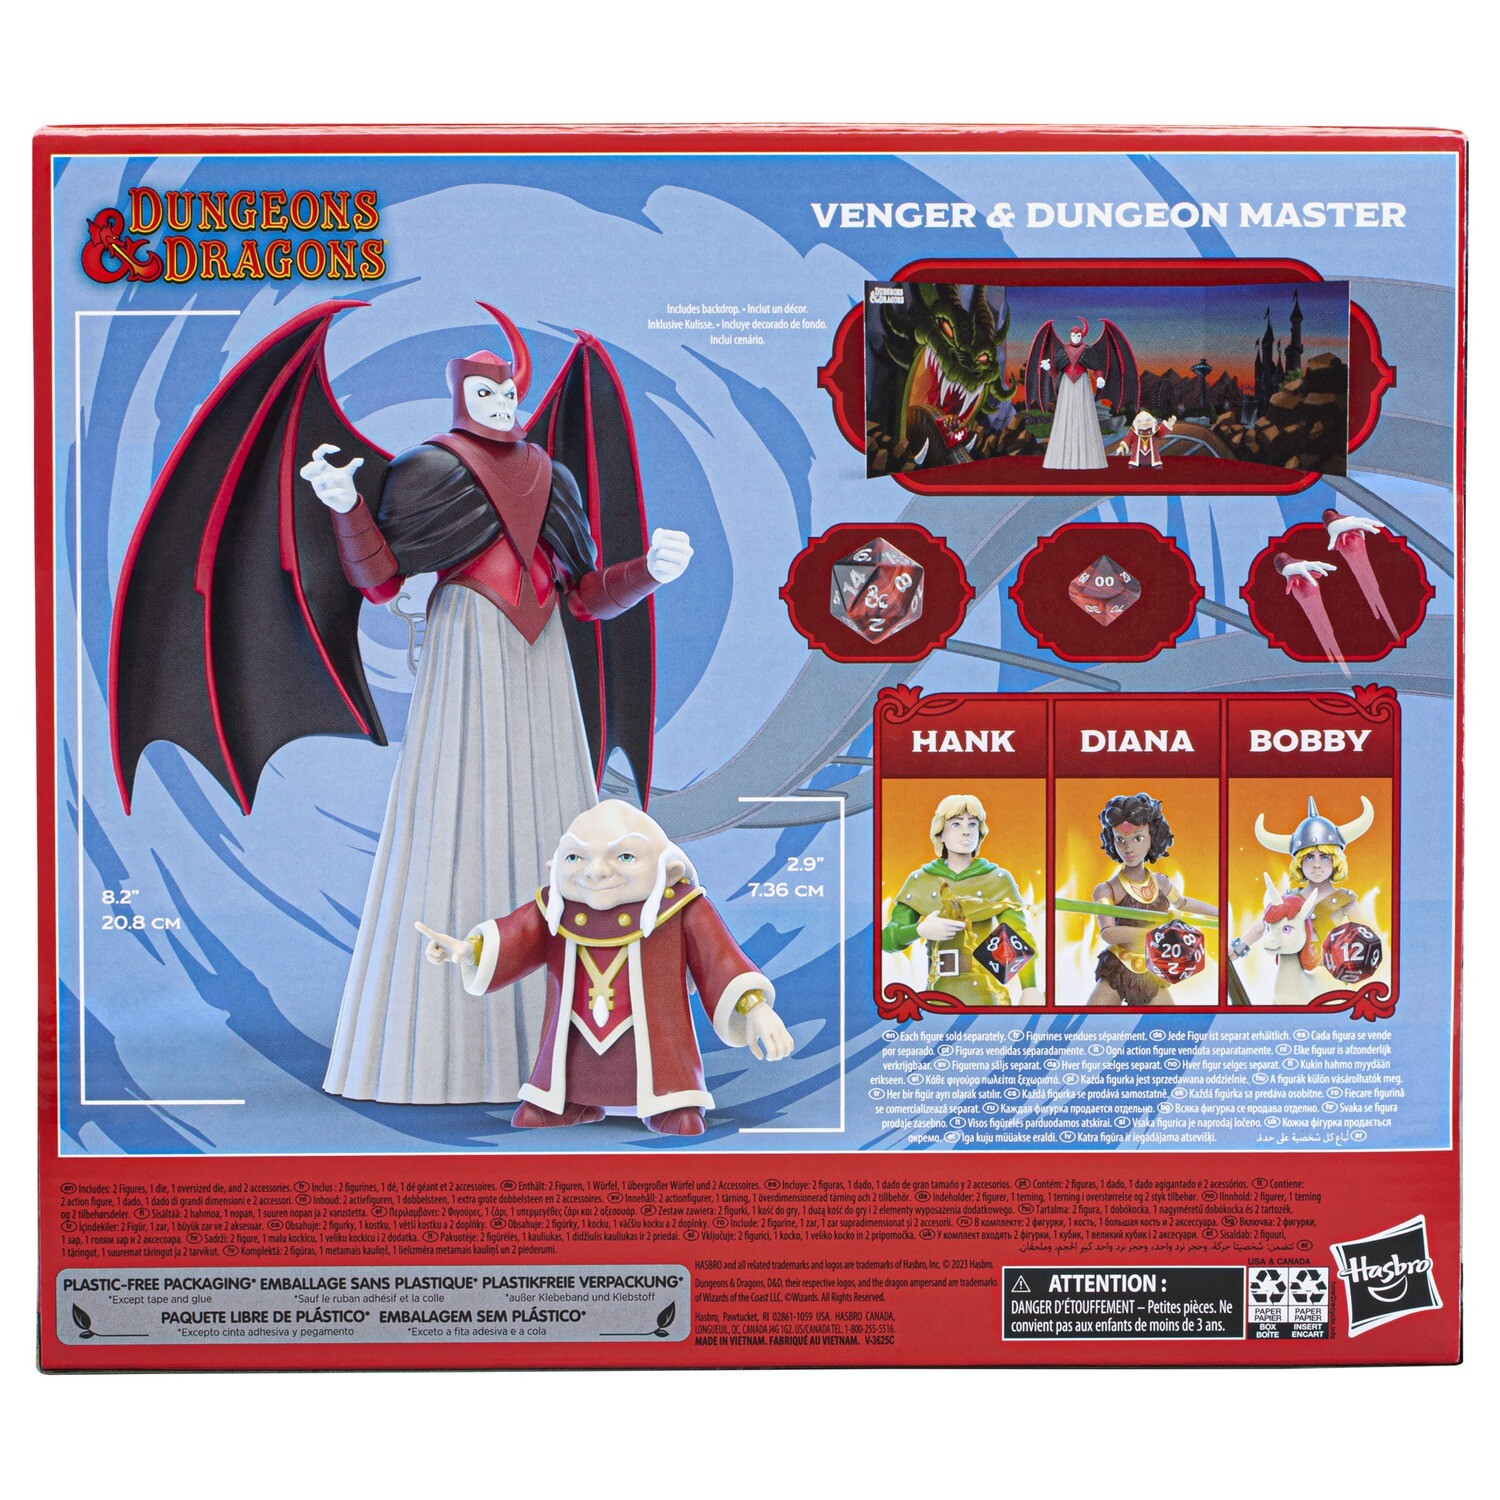 Pre-order Dungeons and Dragons Cartoon Venger and Dungeon Master Box Set